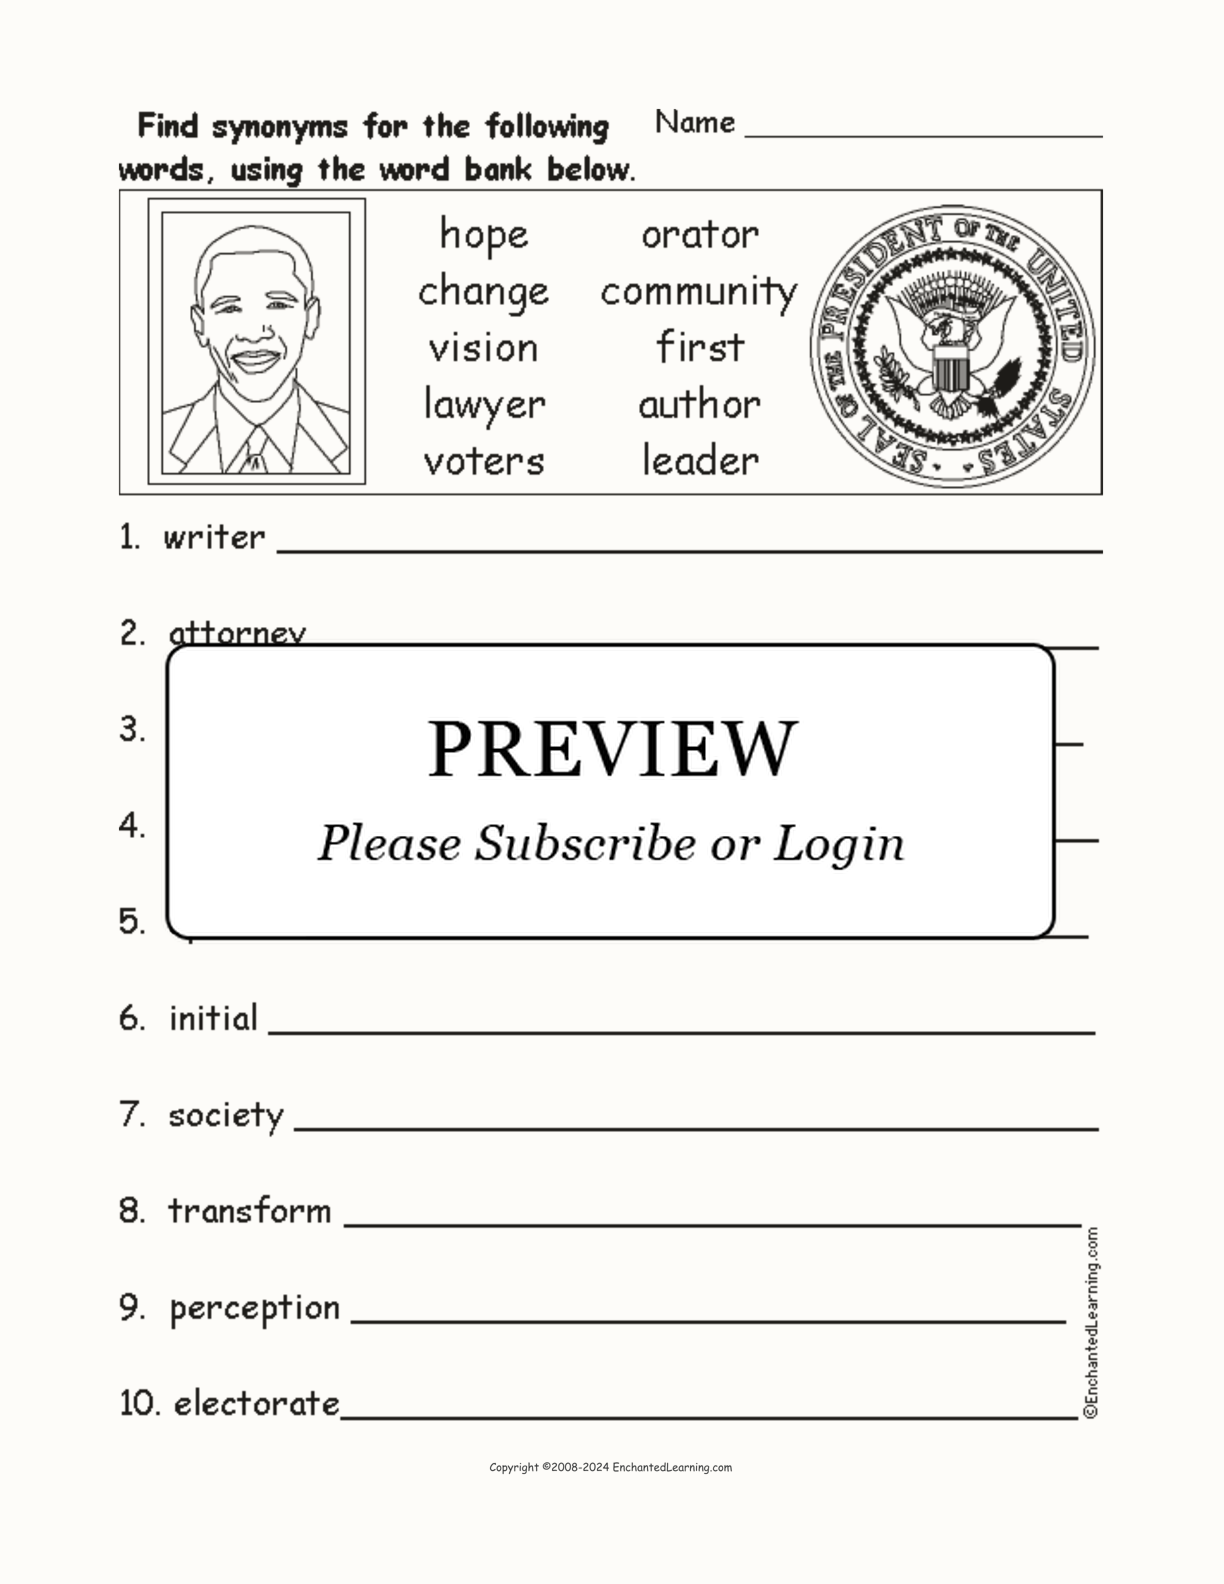 Obama-Related Synonyms interactive worksheet page 1